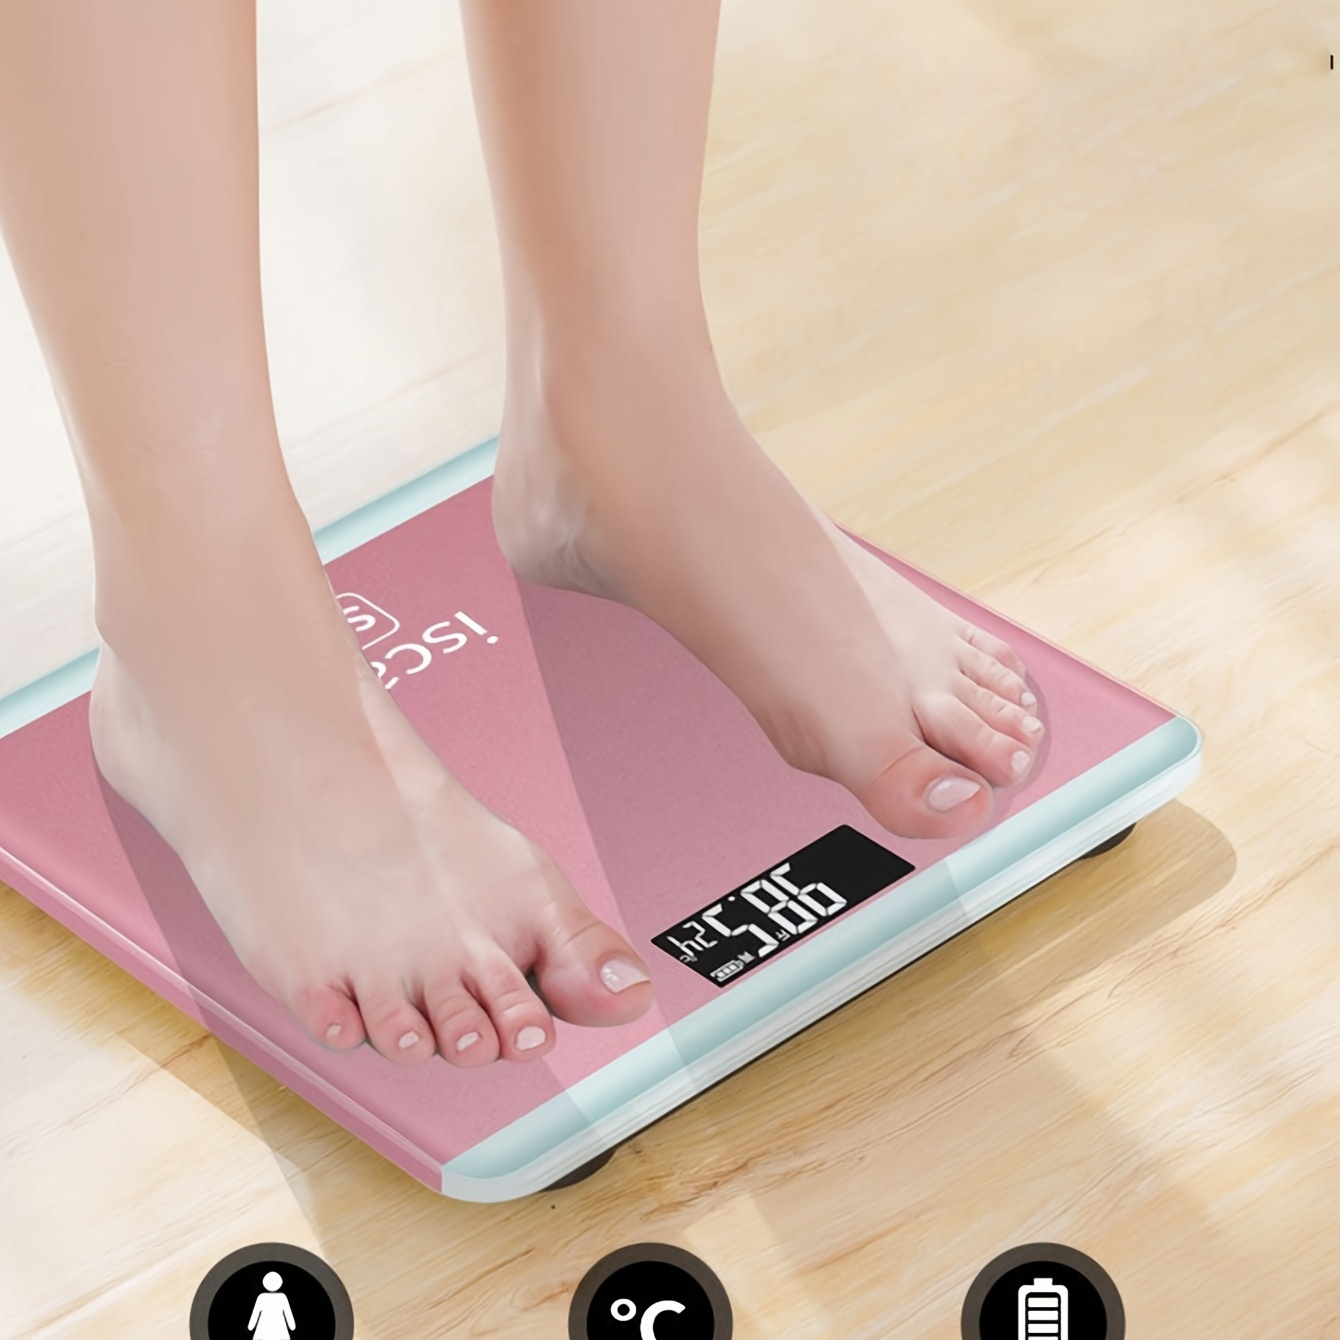 Body Weight Scales Smart Bathroom Weight Scale Body Fat Weighing